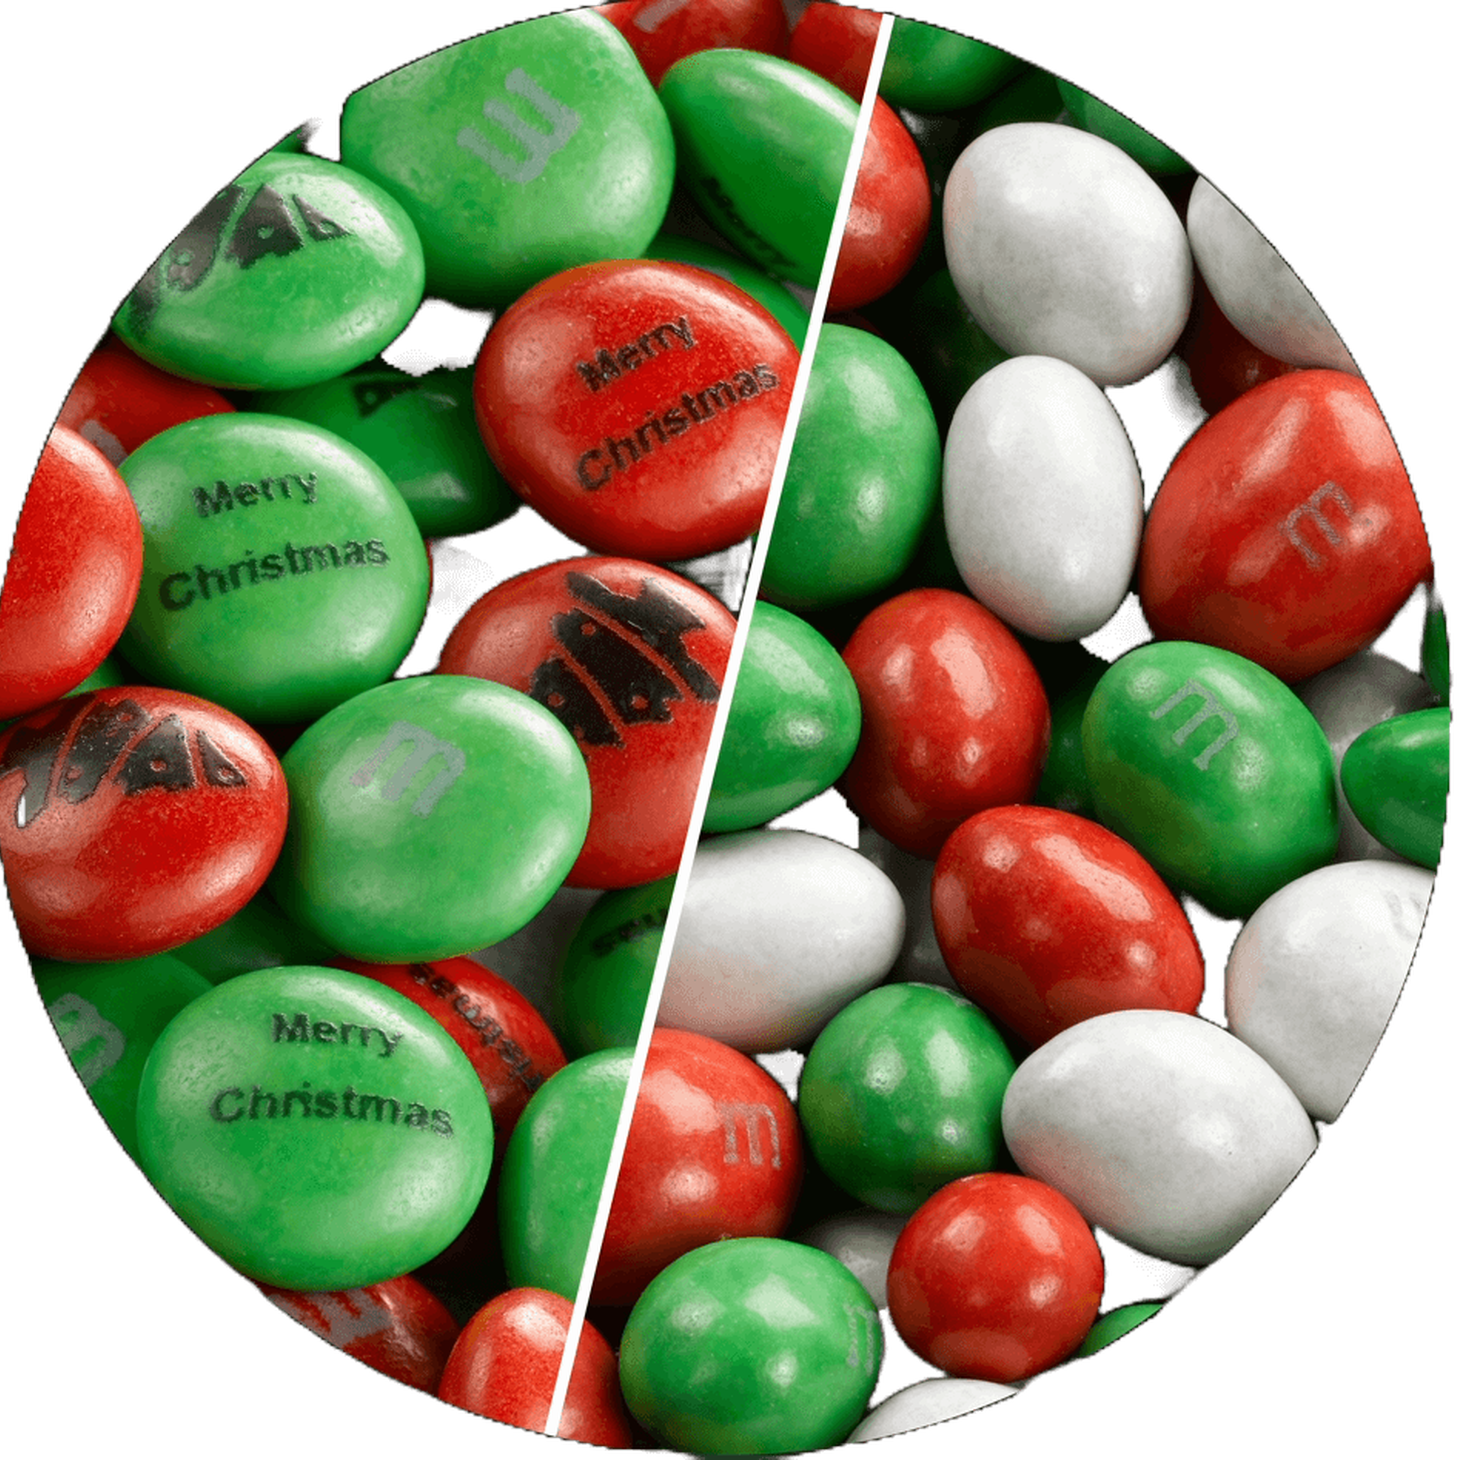 Split image of M&M'S milk chocolate and Peanut in red, green and white colors